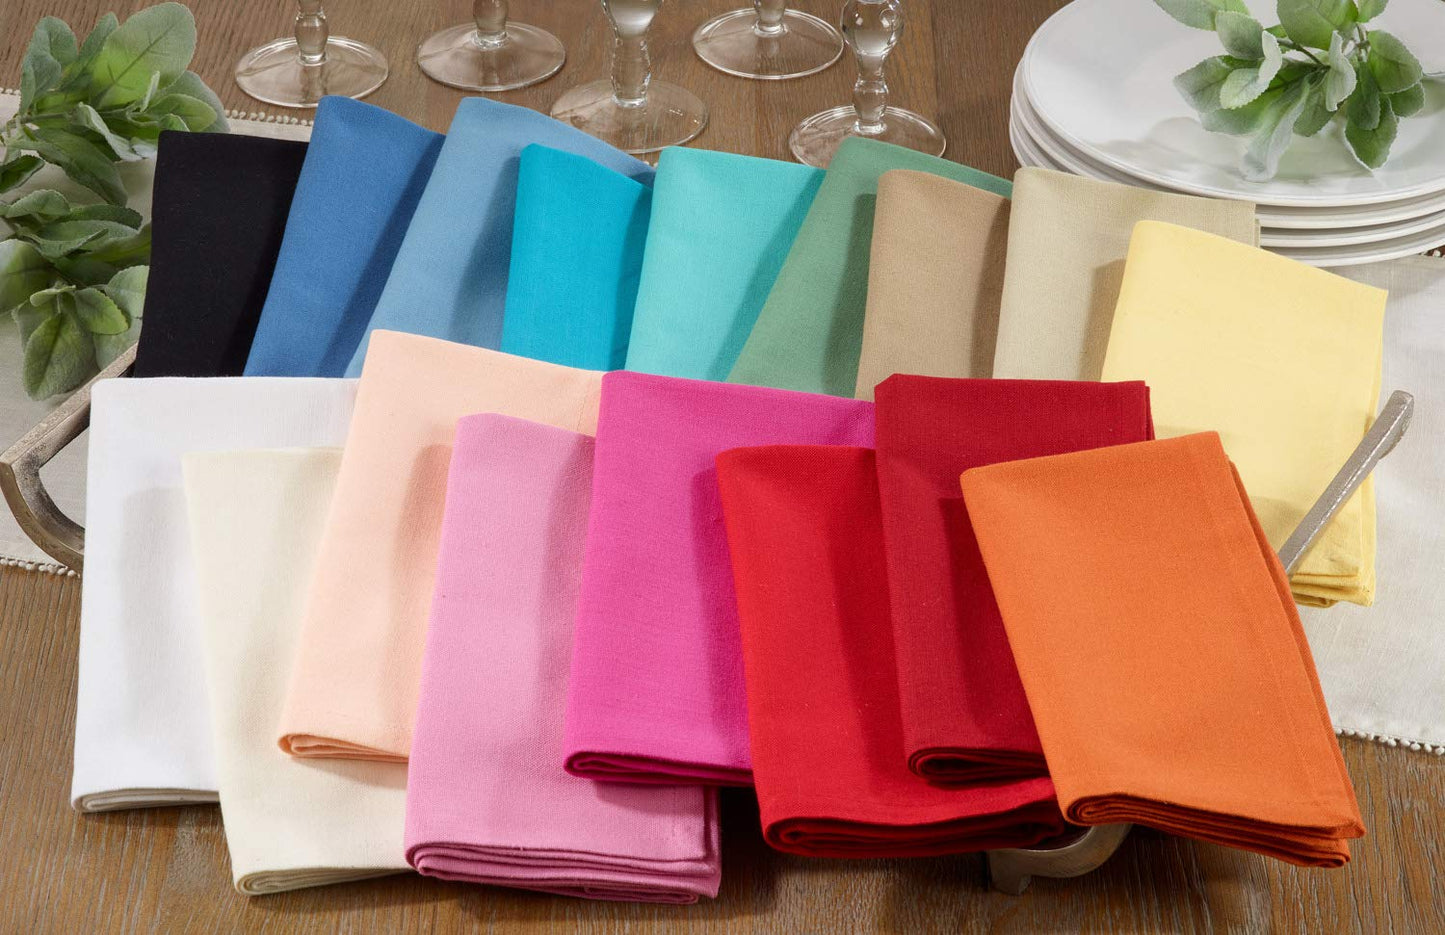 Fennco Styles Solid Bold Colors 20-Inch Square Cotton Cloth Napkins for Everyday Use, Dining Table, Banquet and Special Occasion